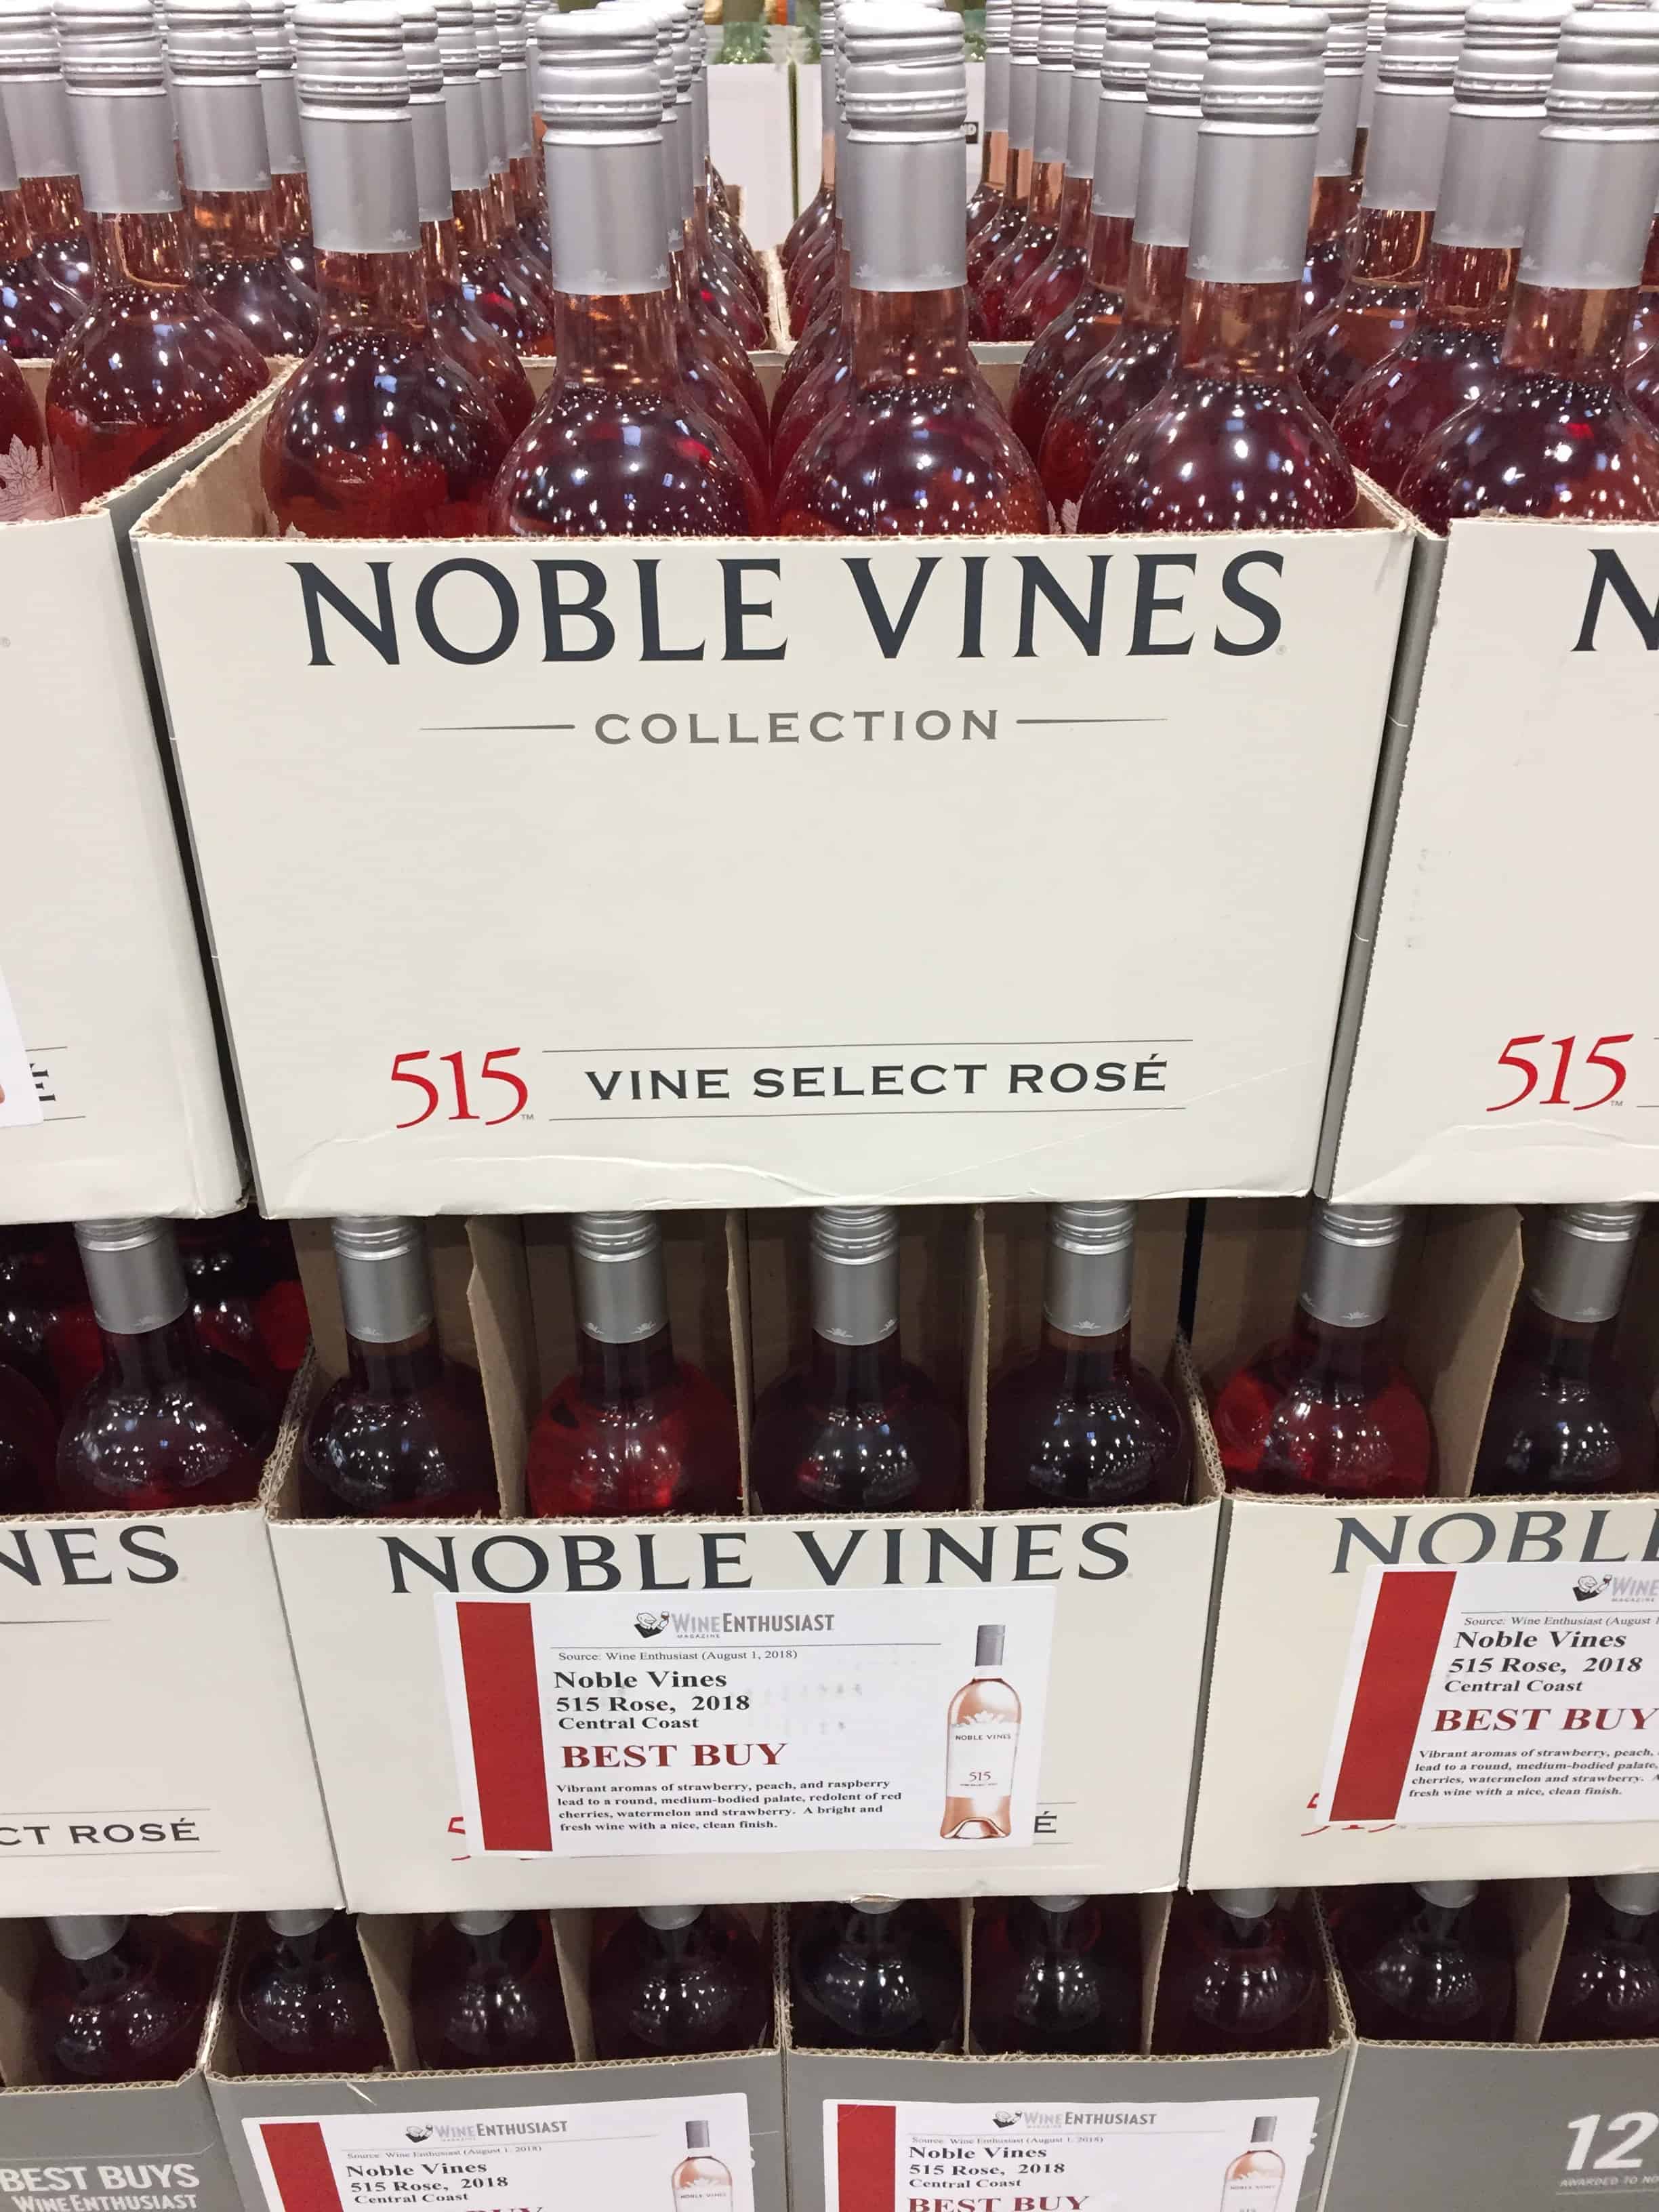 Cases of Noble Vines Rose case-stacked at Costco